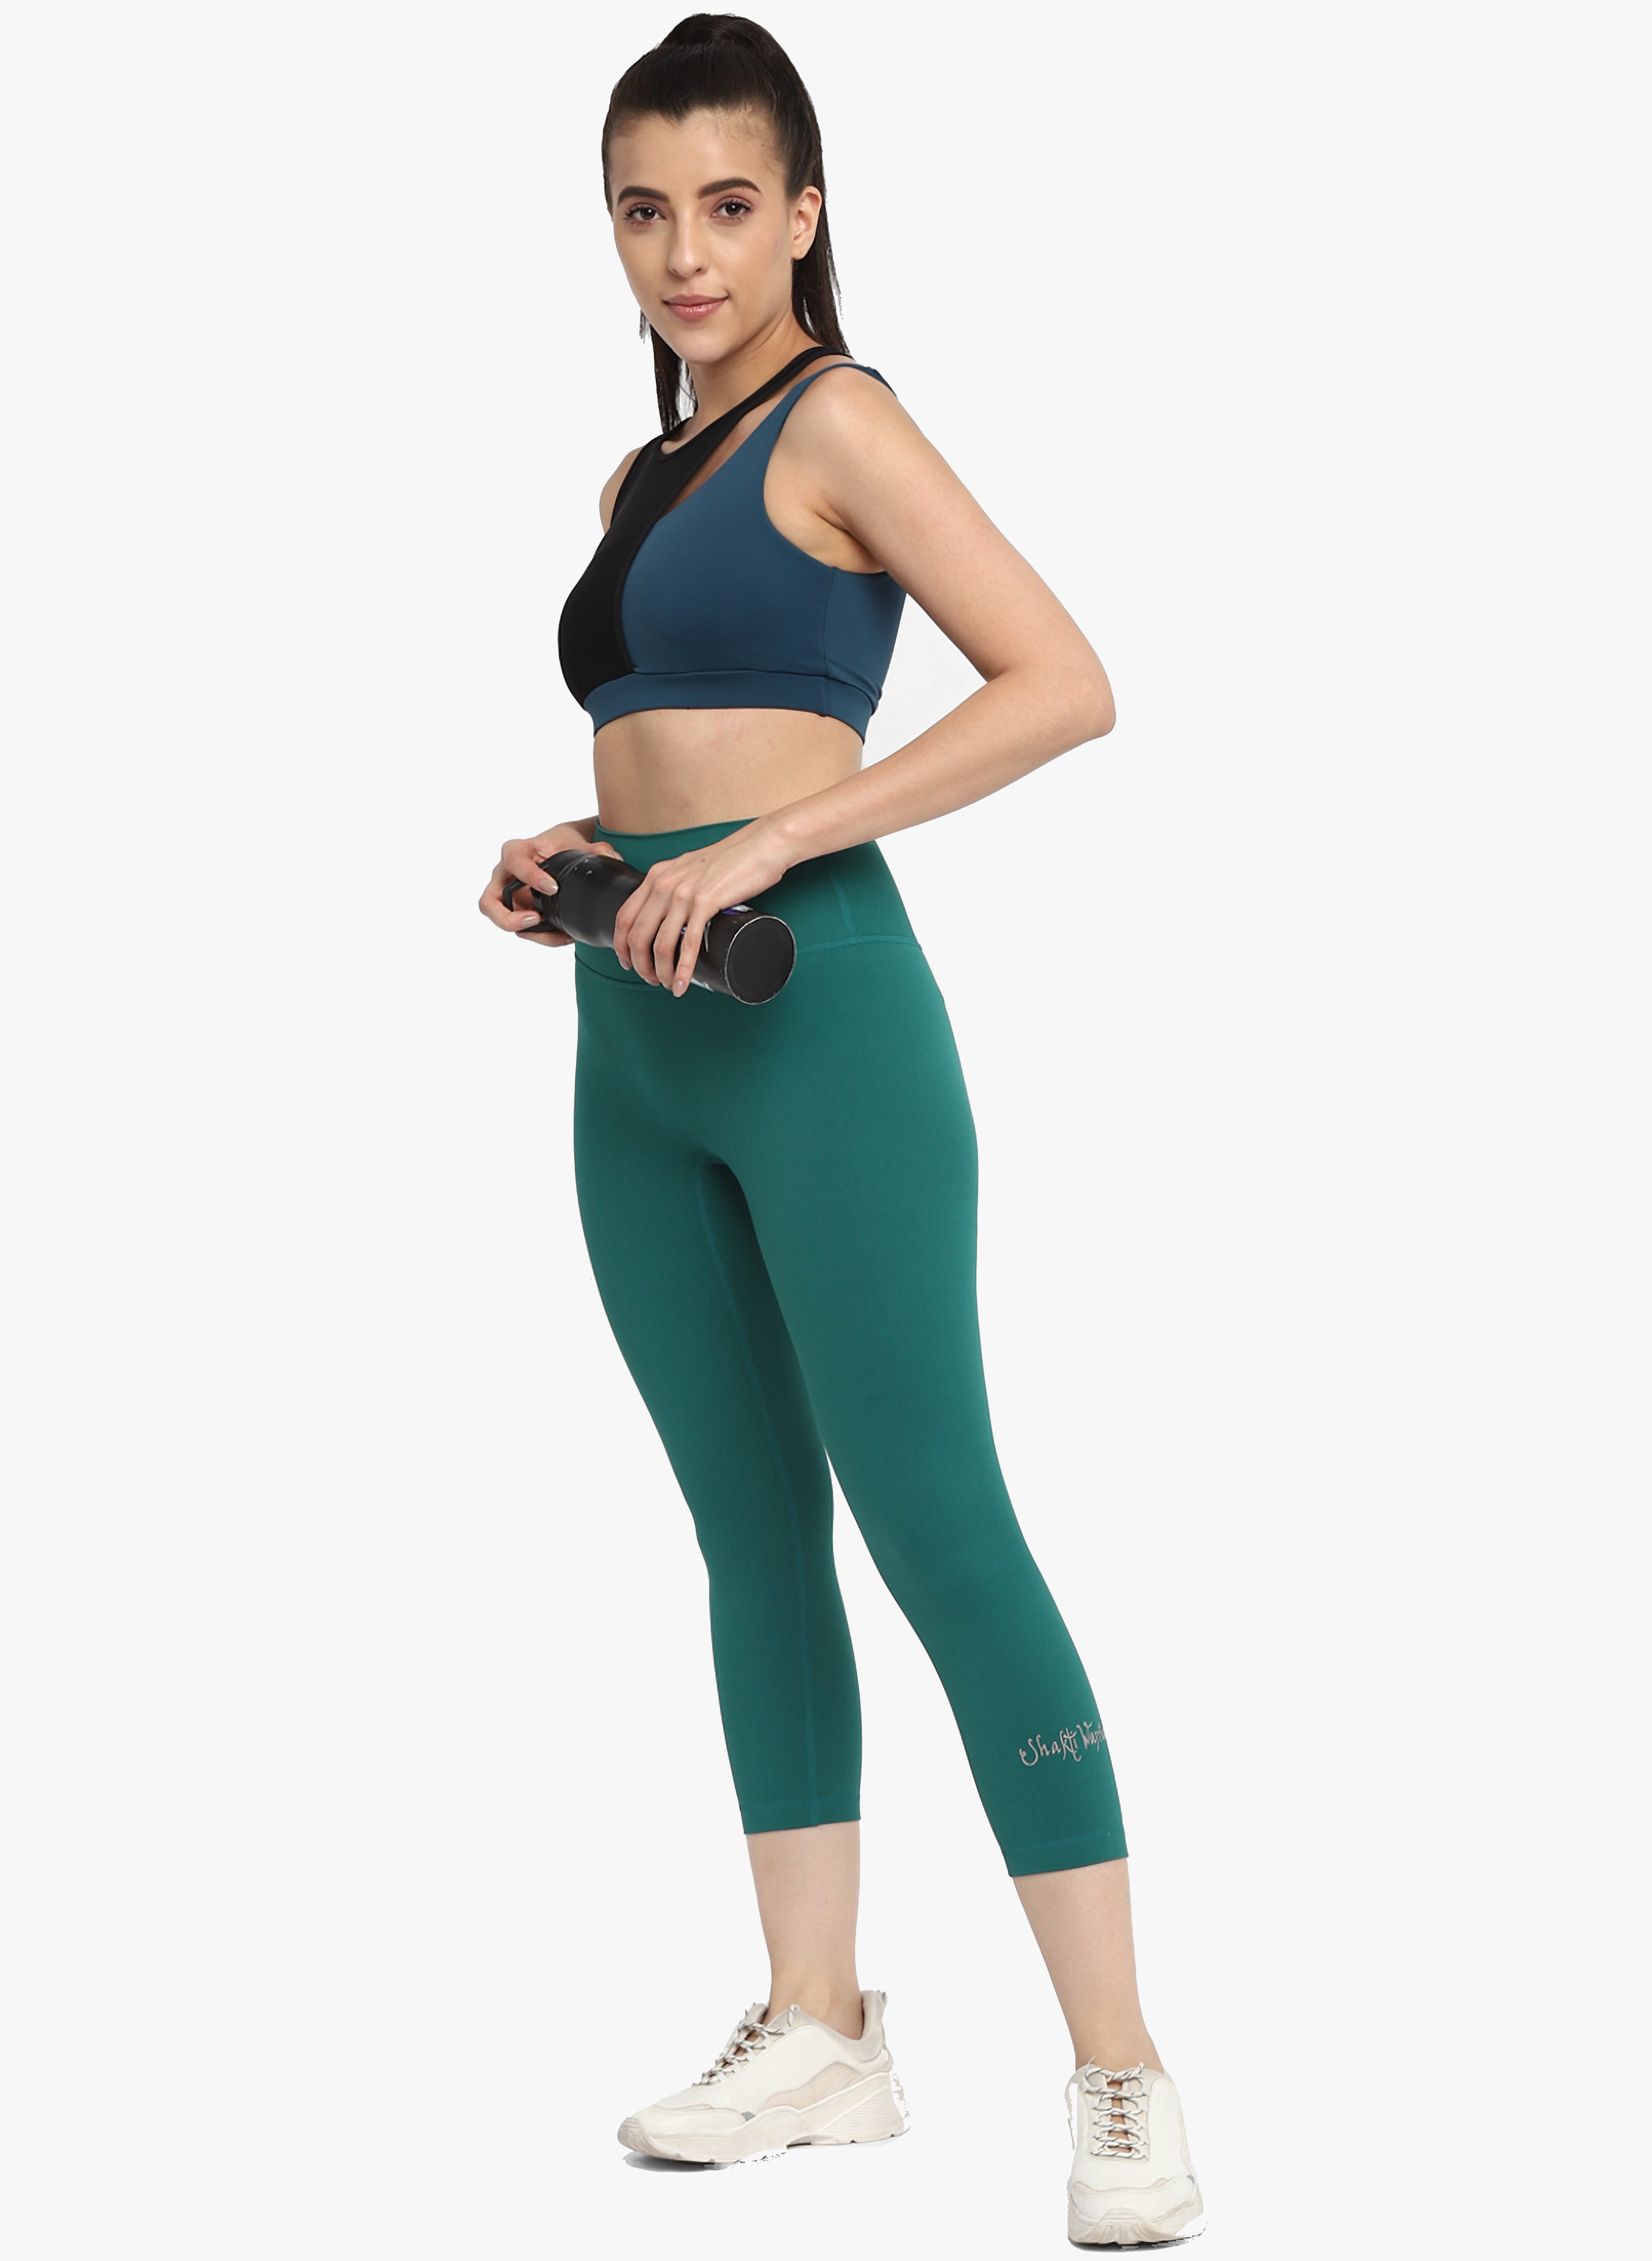 Affordable Workout Leggings For Women